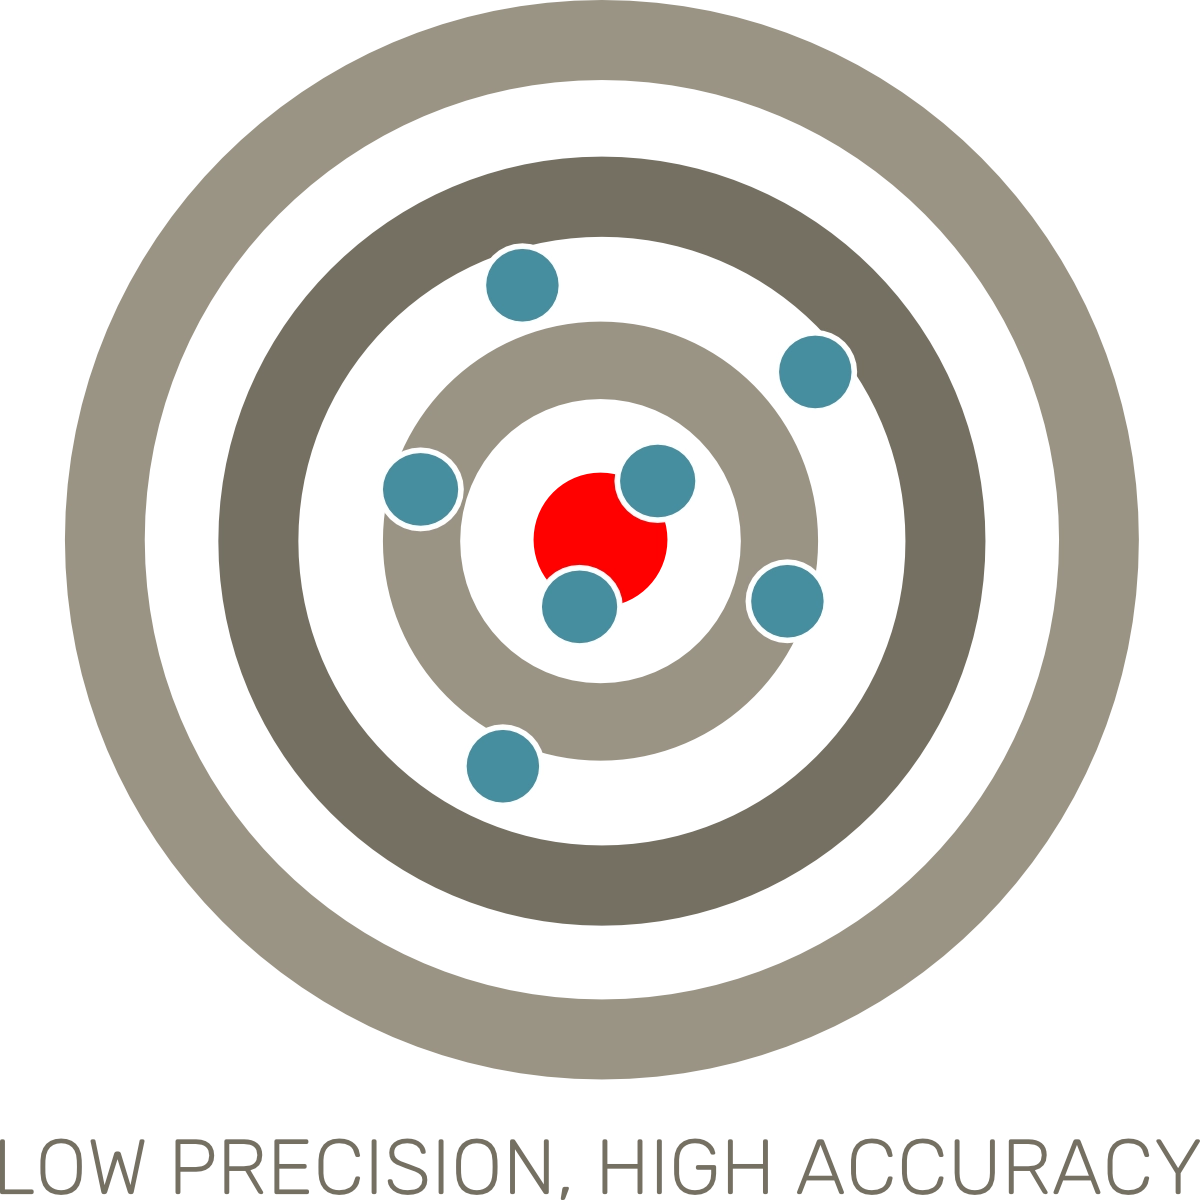 Low precision and high accuracy